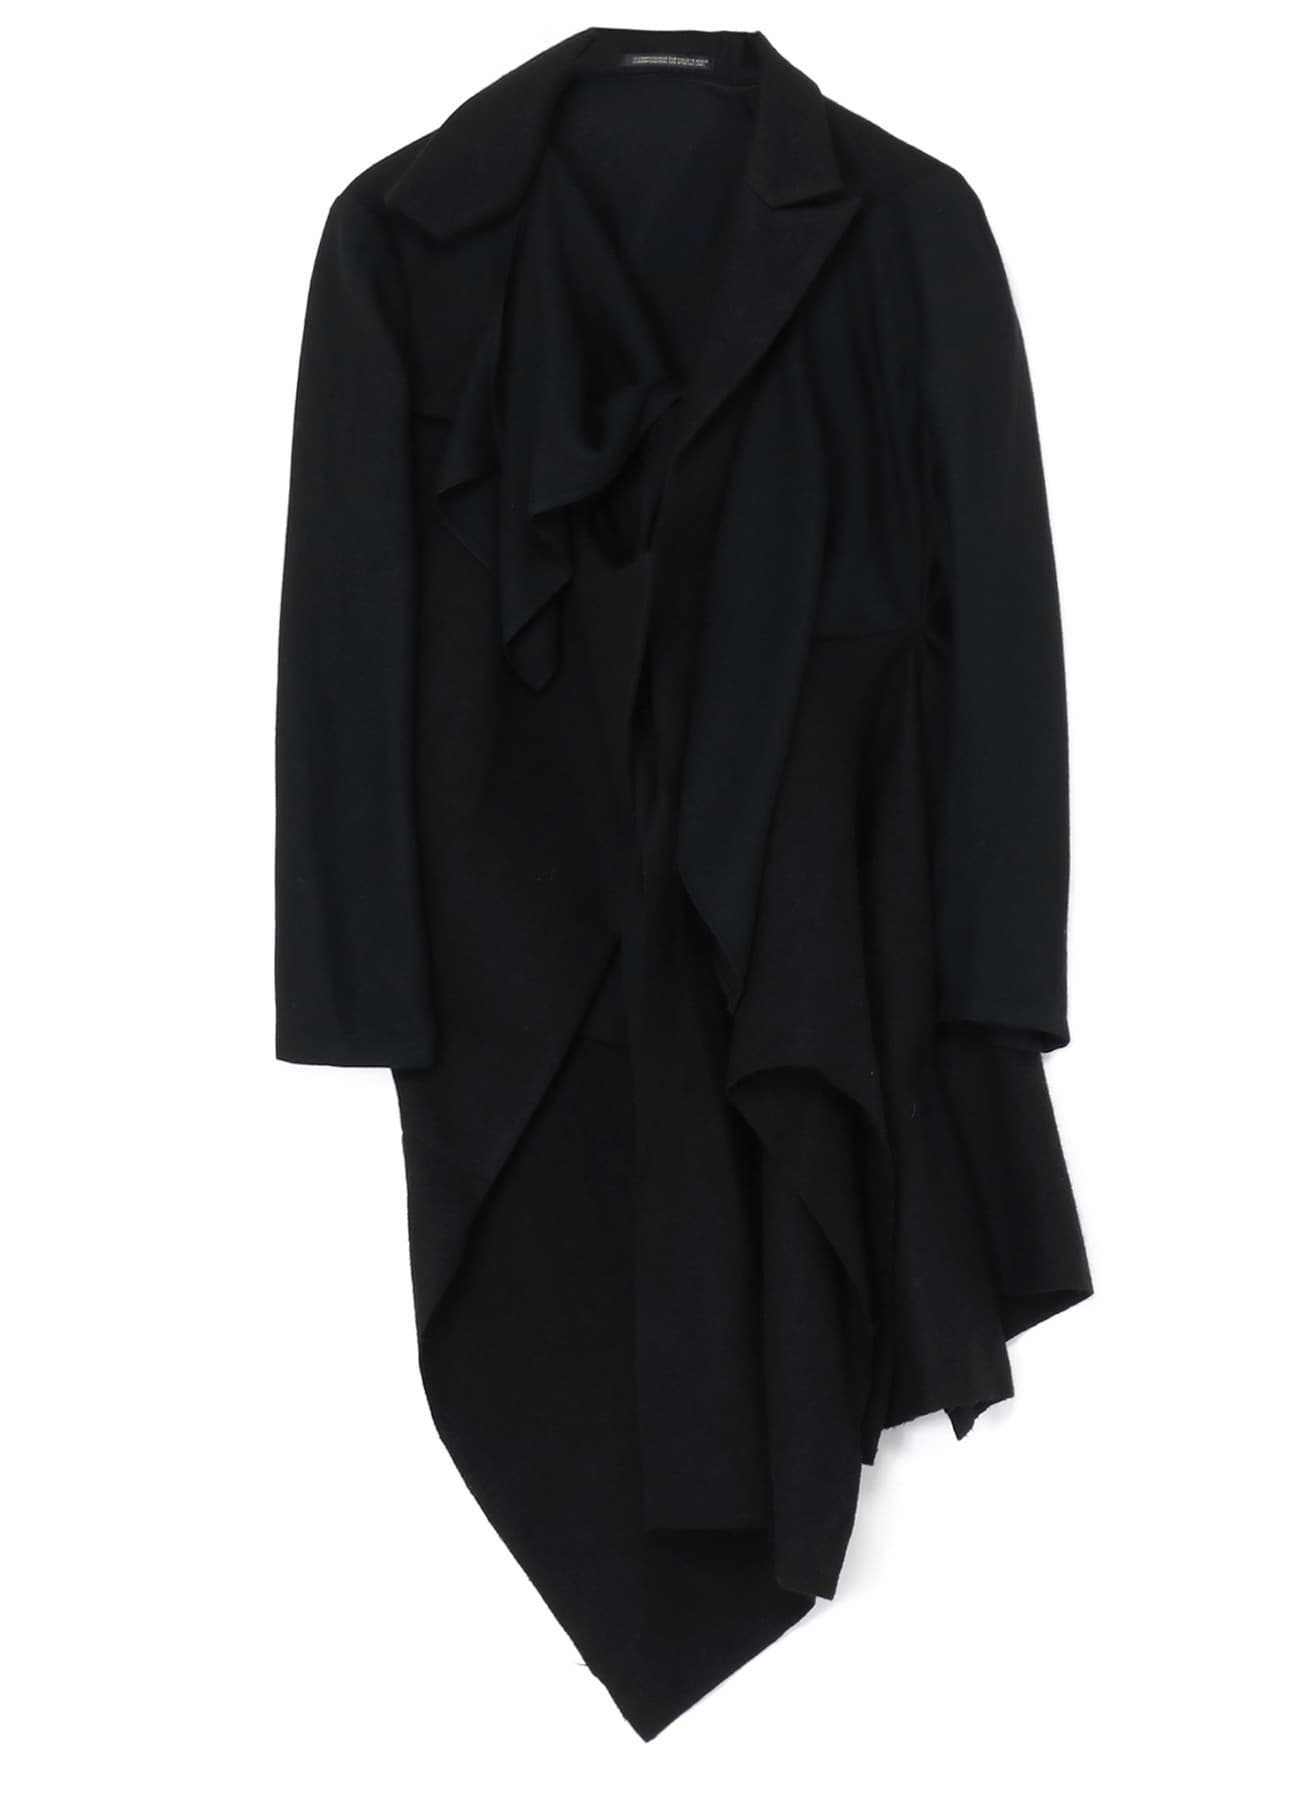 RIGHT-SIDE FLOWING JACKET